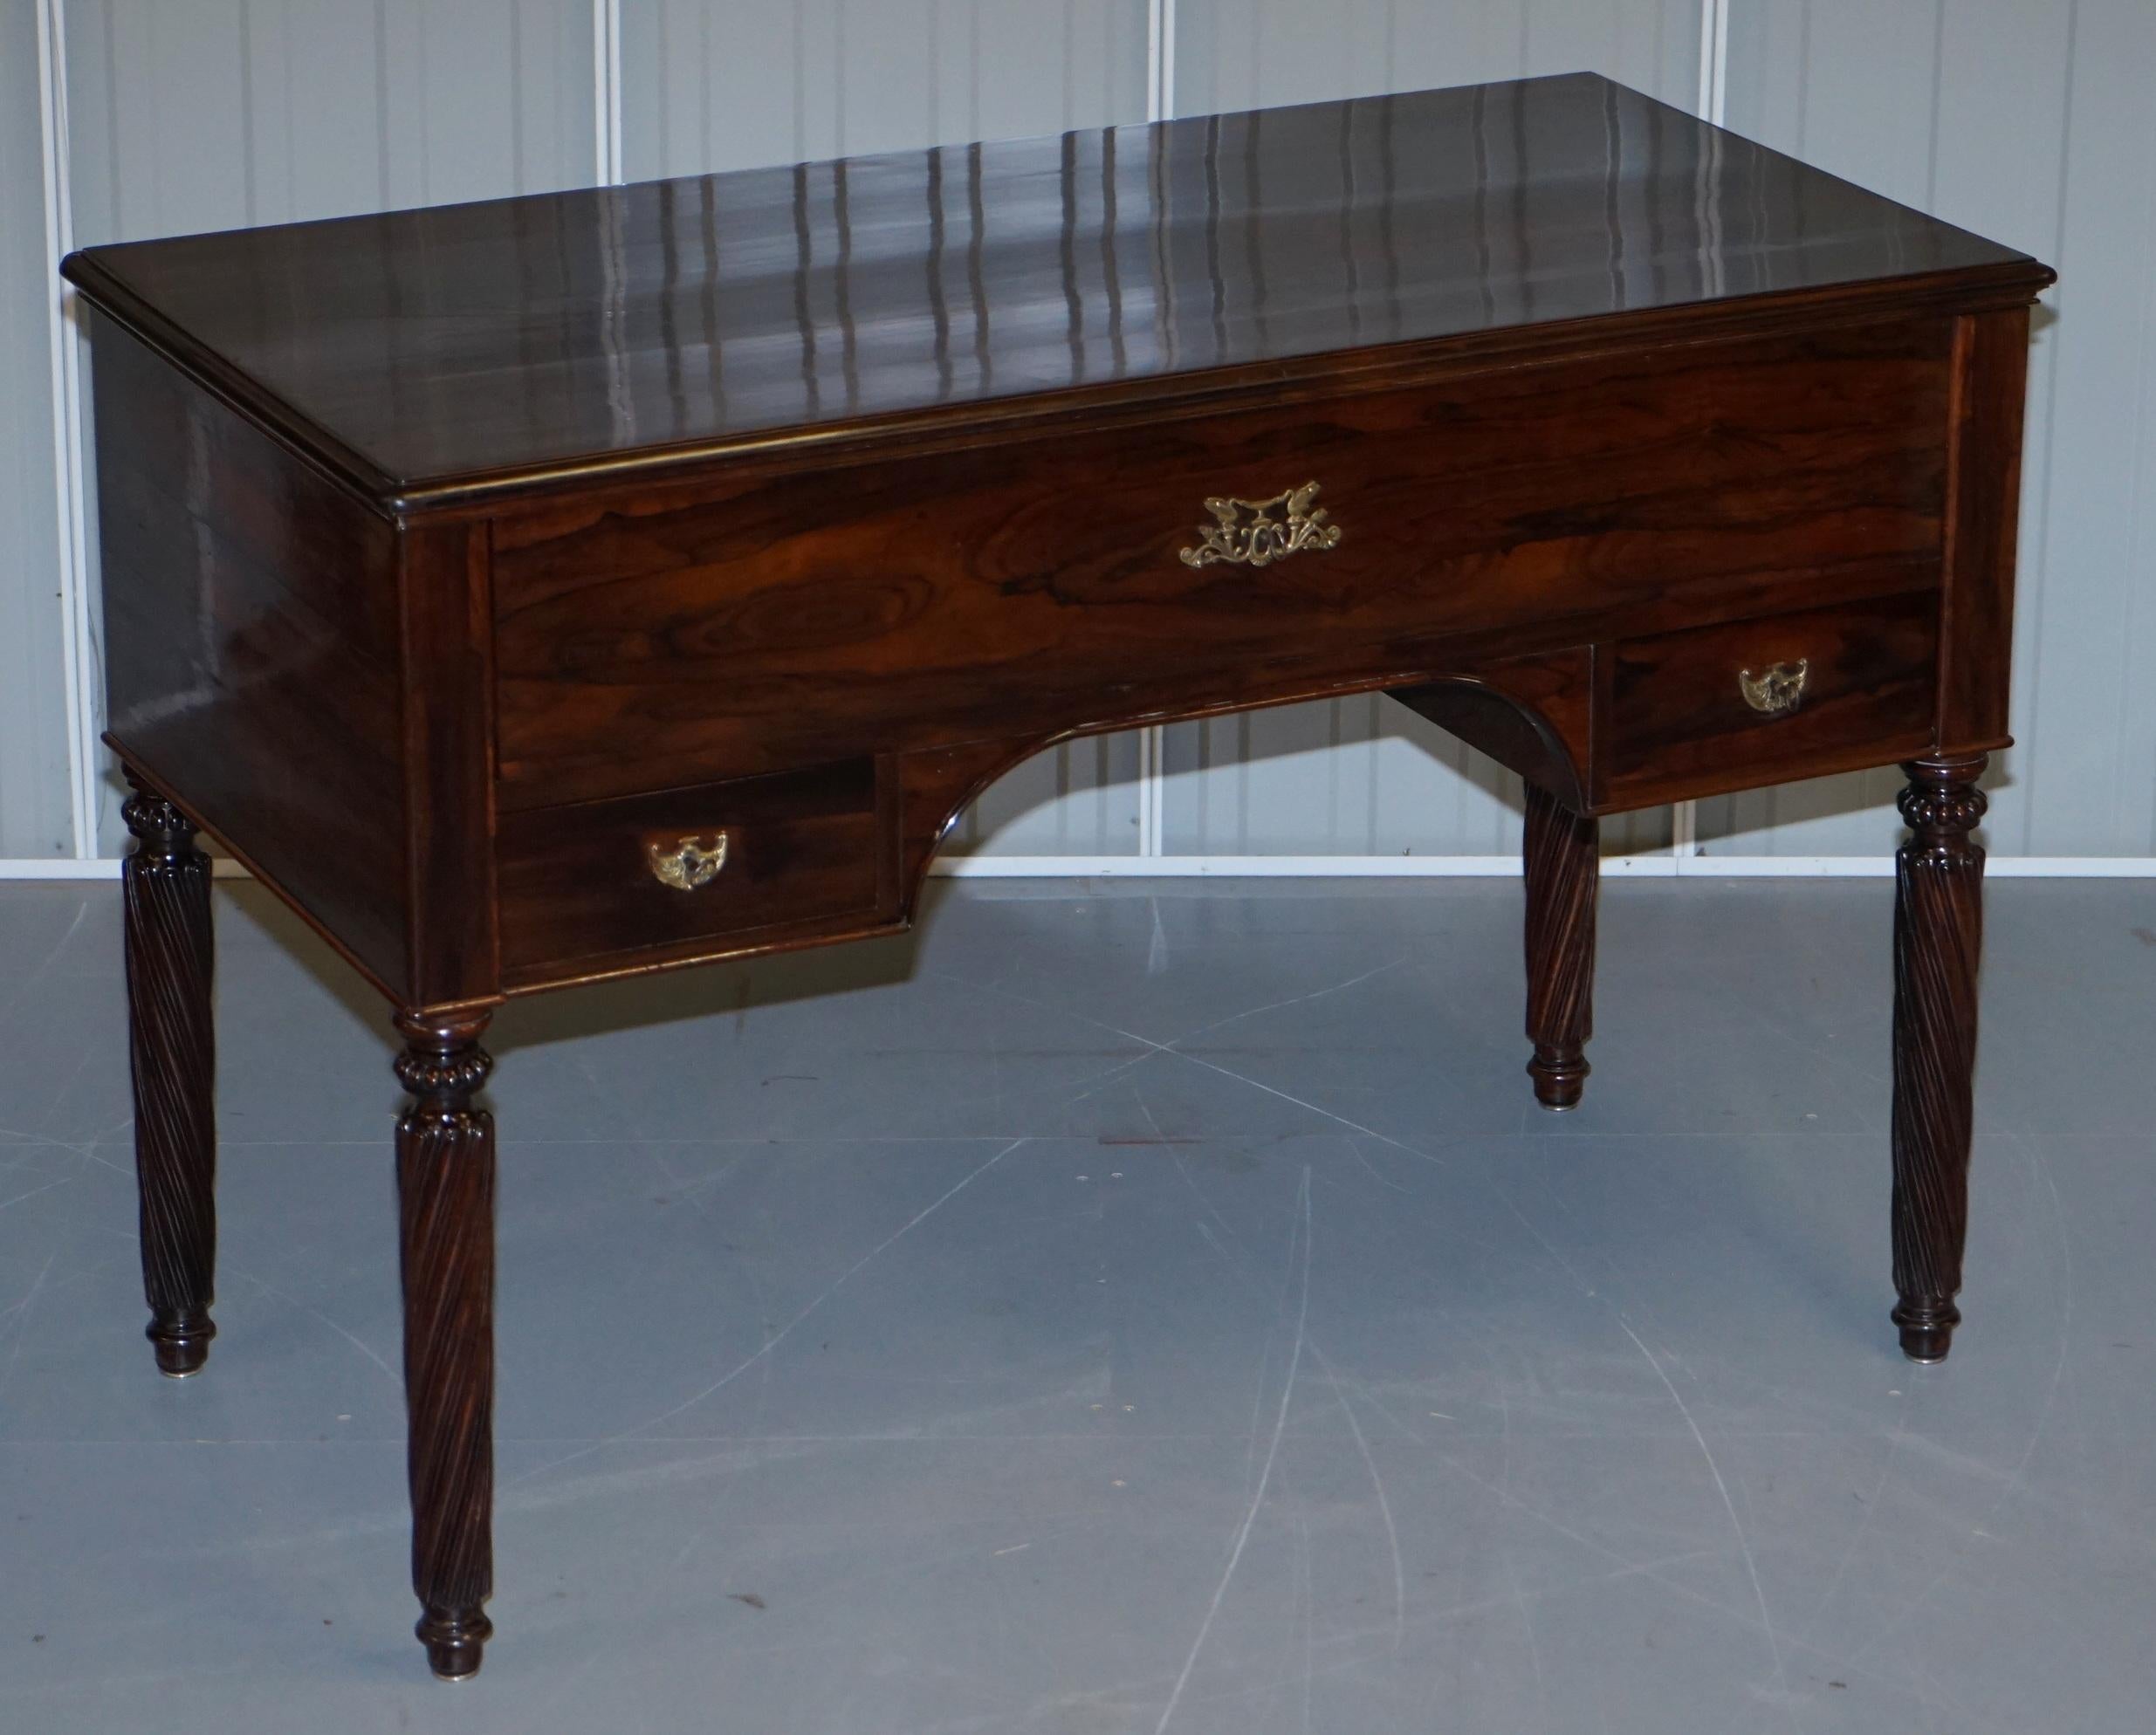 We are delighted to offer for sale this stunning and very rare original French Louise Philippe solid rare wood Campaign desk bureau with vintage certificate

This desk is very special and really exceptionally rare. I’ll talk you through the